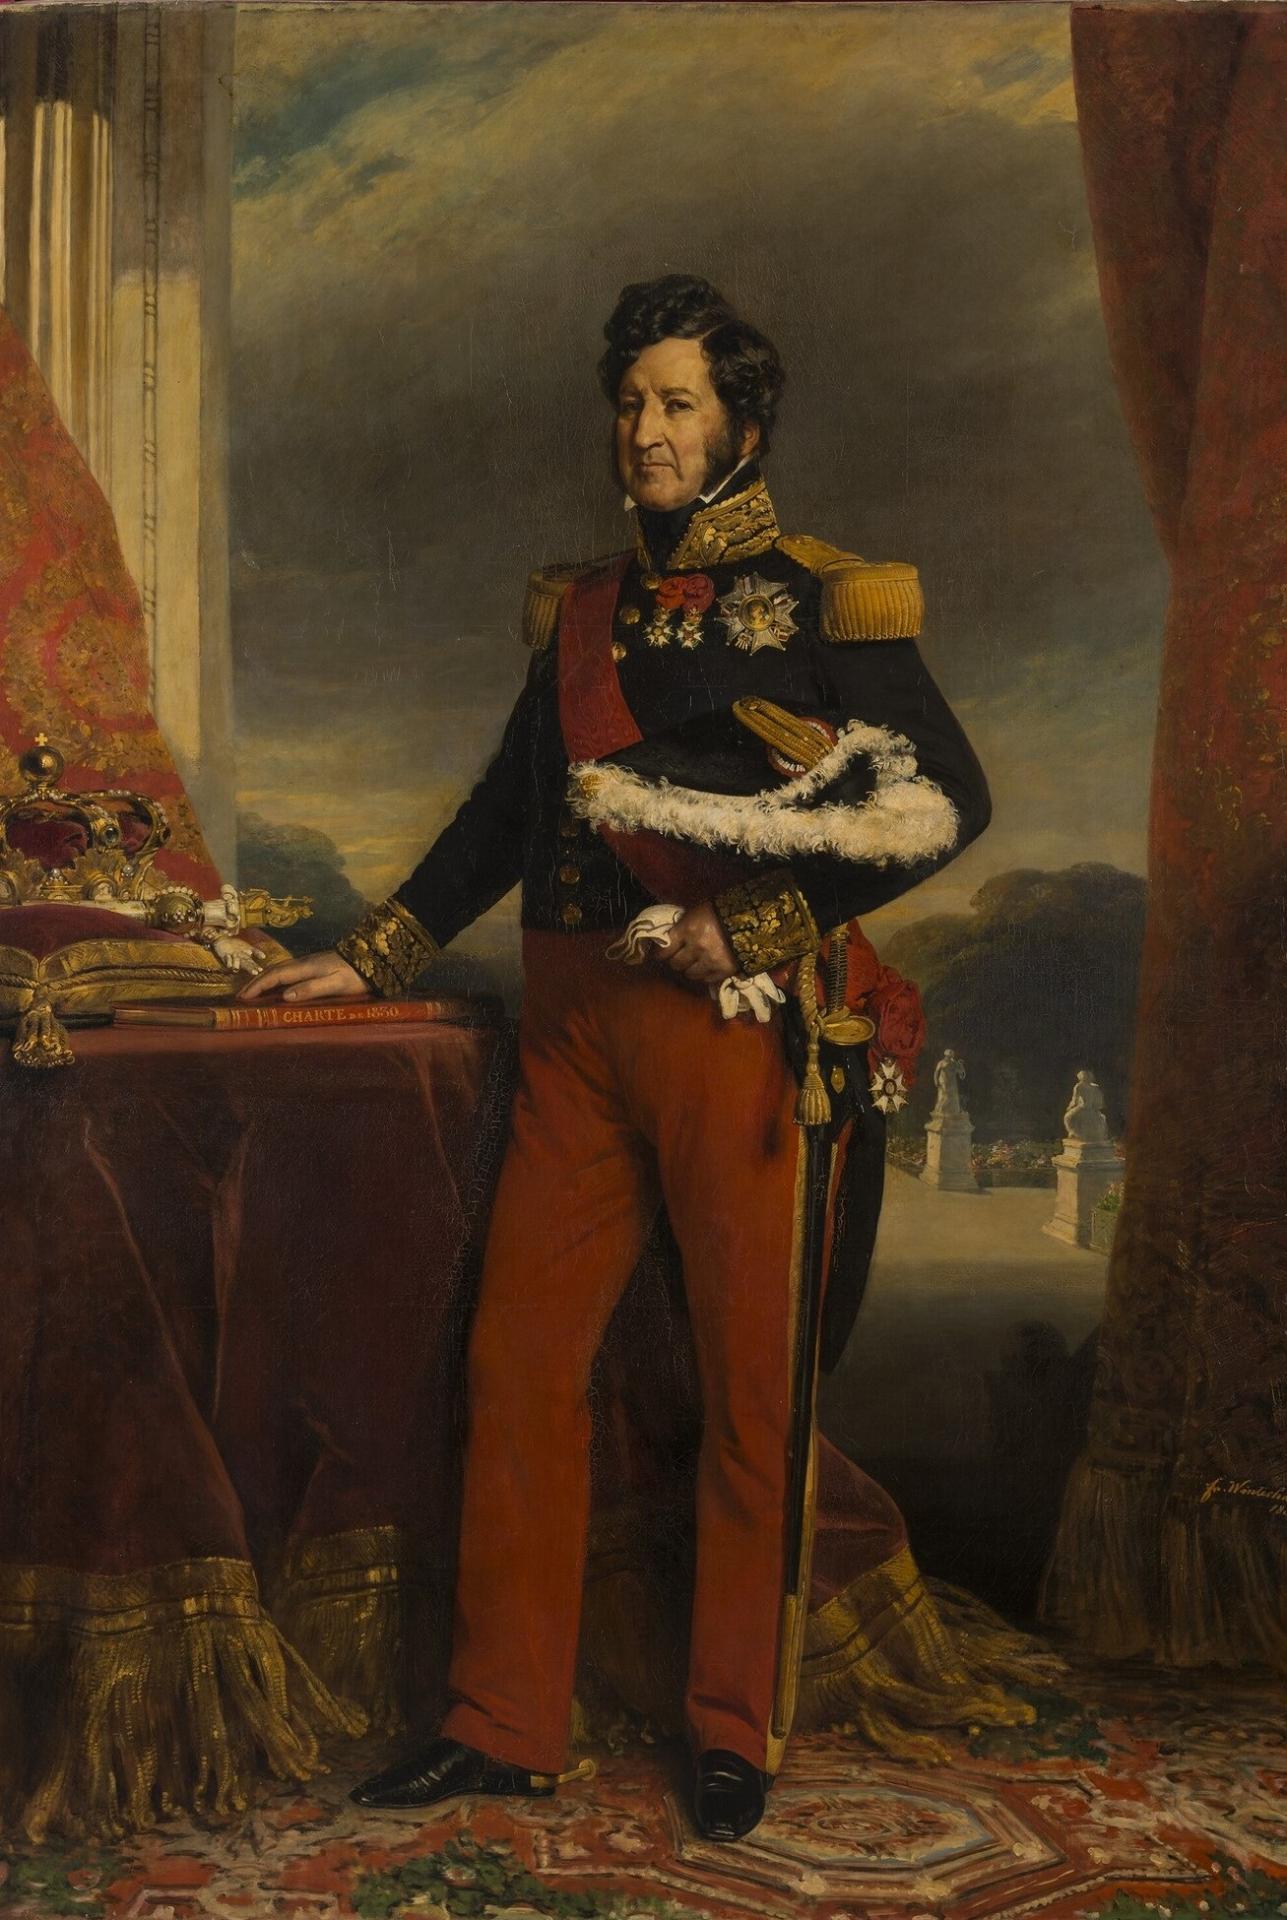 On this date in History: August 9, 1830. Accession of Louis Philippe as  King of the French.